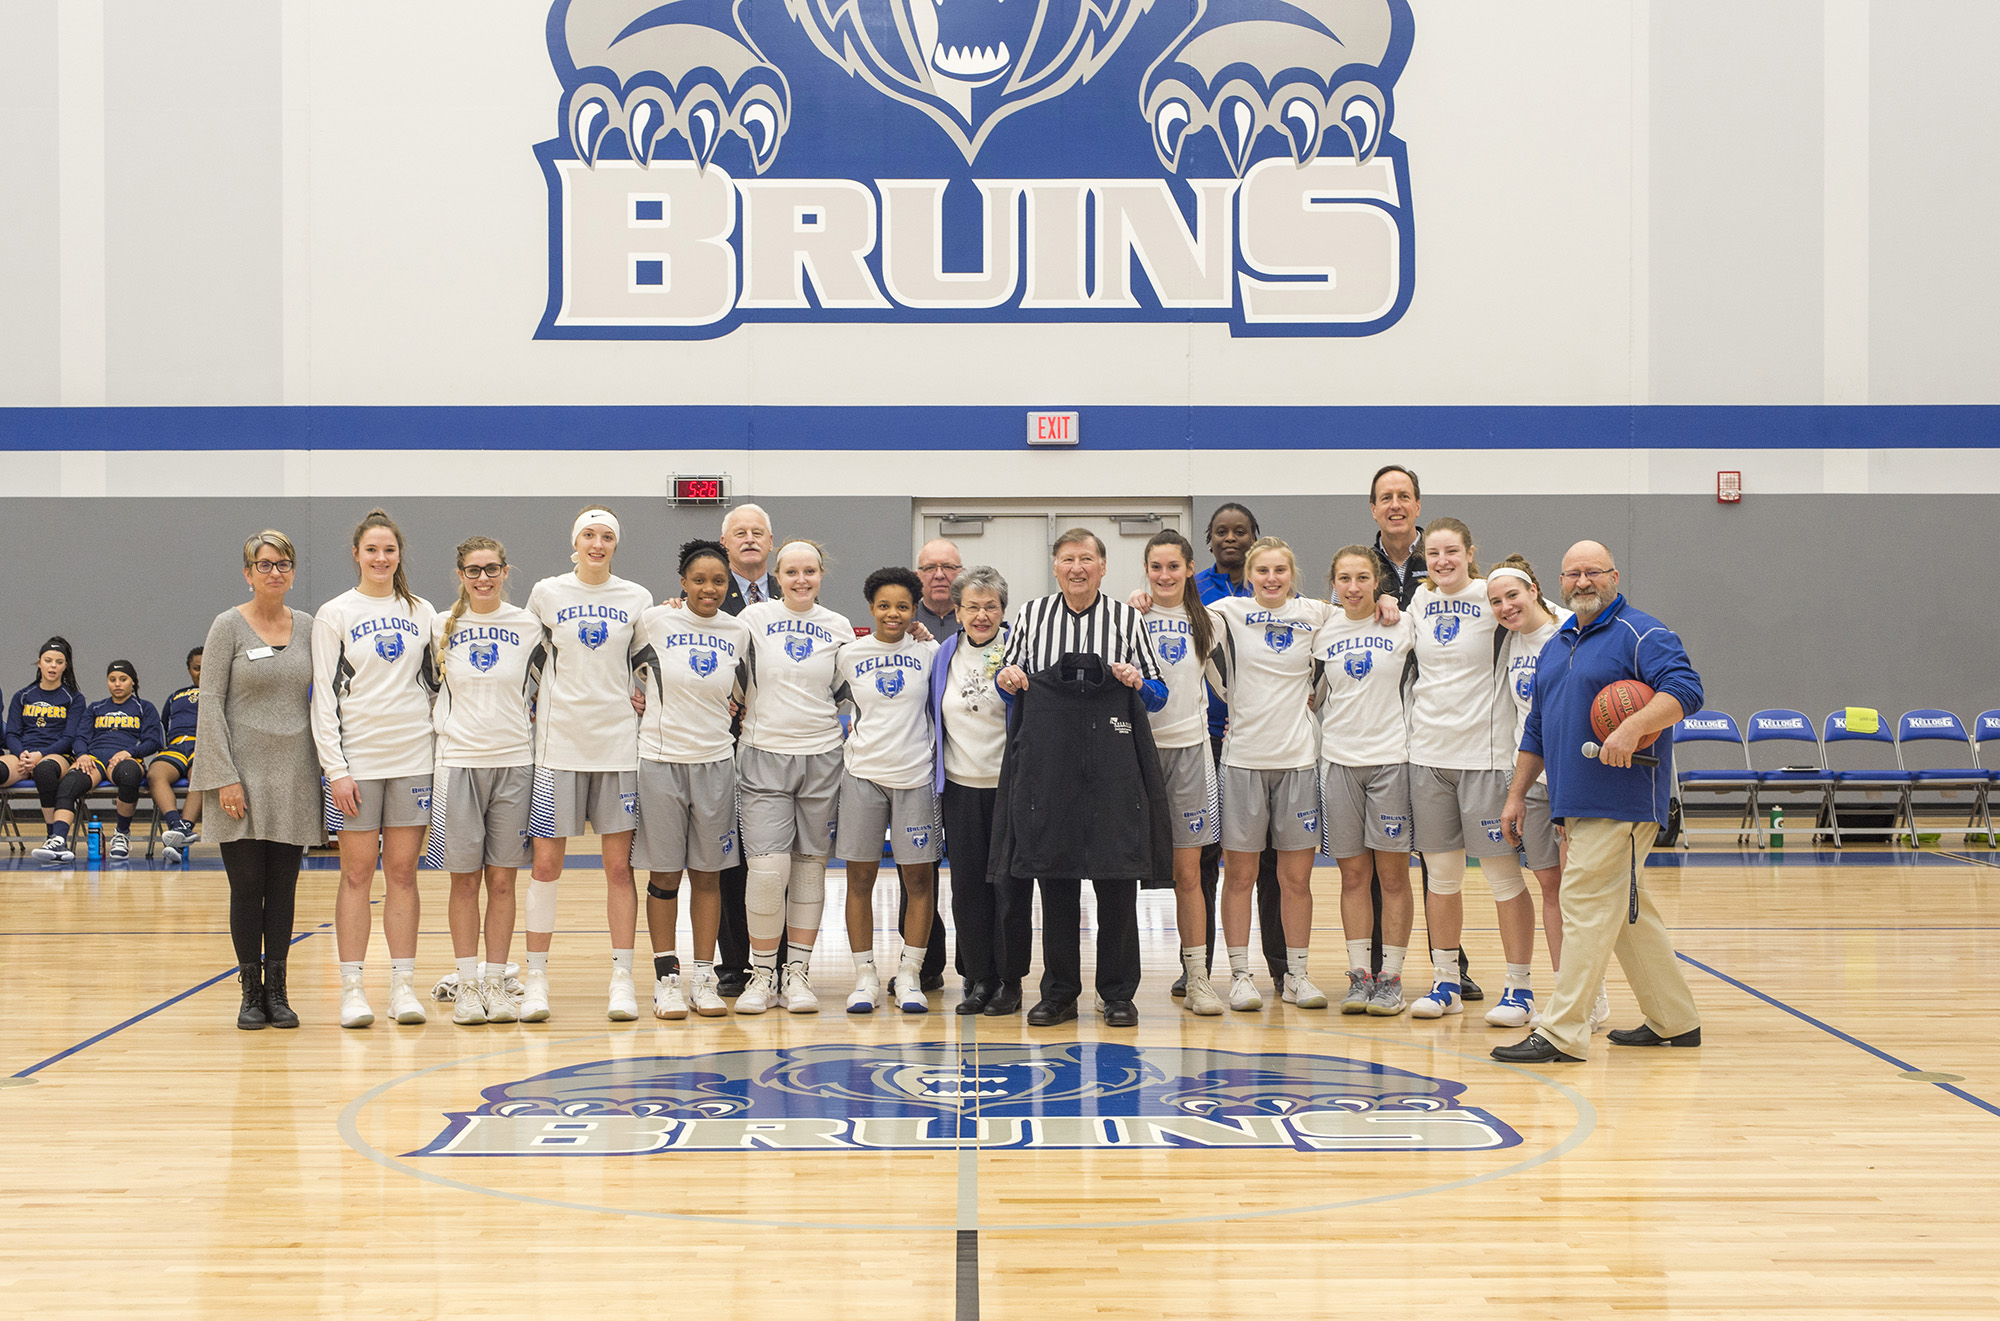 Former Battle Creek mayor Al Bobrofsky, who officiated the College's first basketball game in 1966, poses with wife Ann, the KCC women's basketball team and college officials before the start of the women's basketball game on Dec. 5, 2018.